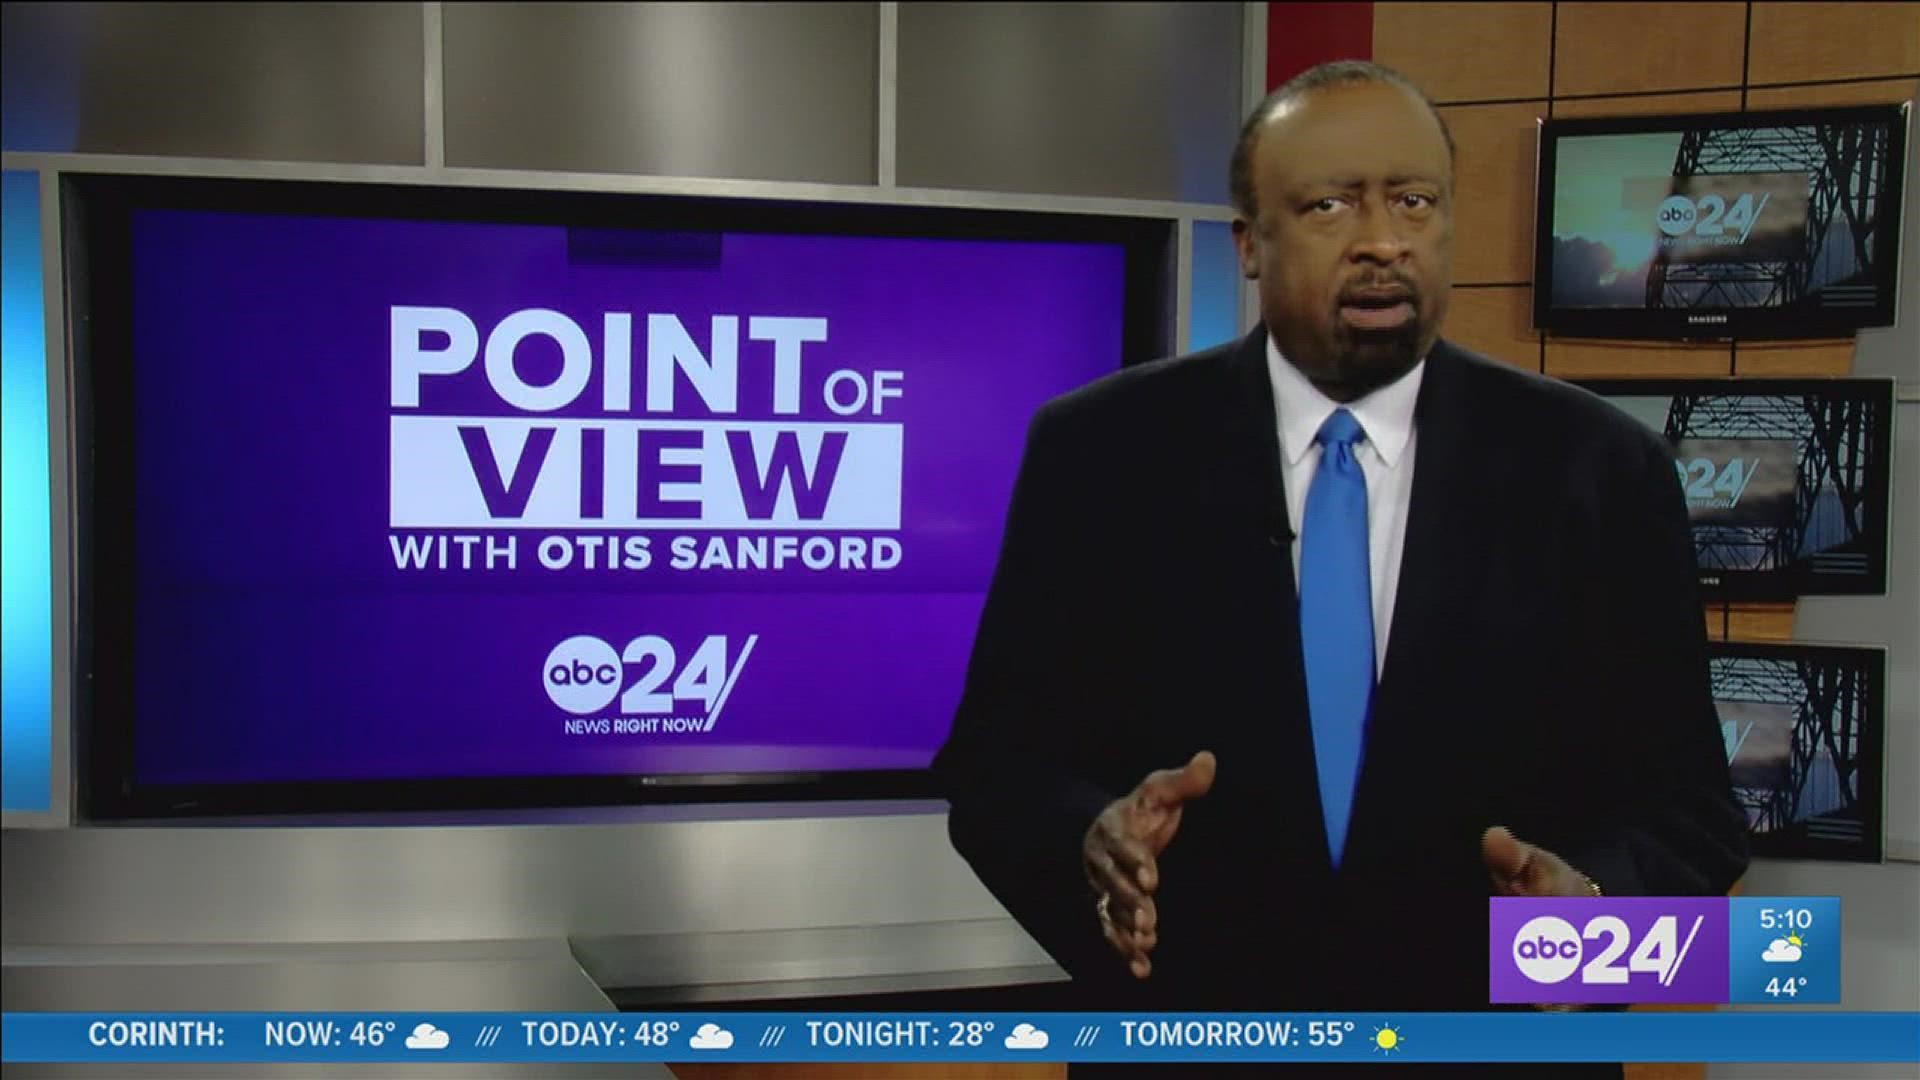 ABC 24 political analyst and commentator Otis Sanford shared his point of view on a plan to revamp the riverbank, including adding a Ferris Wheel.